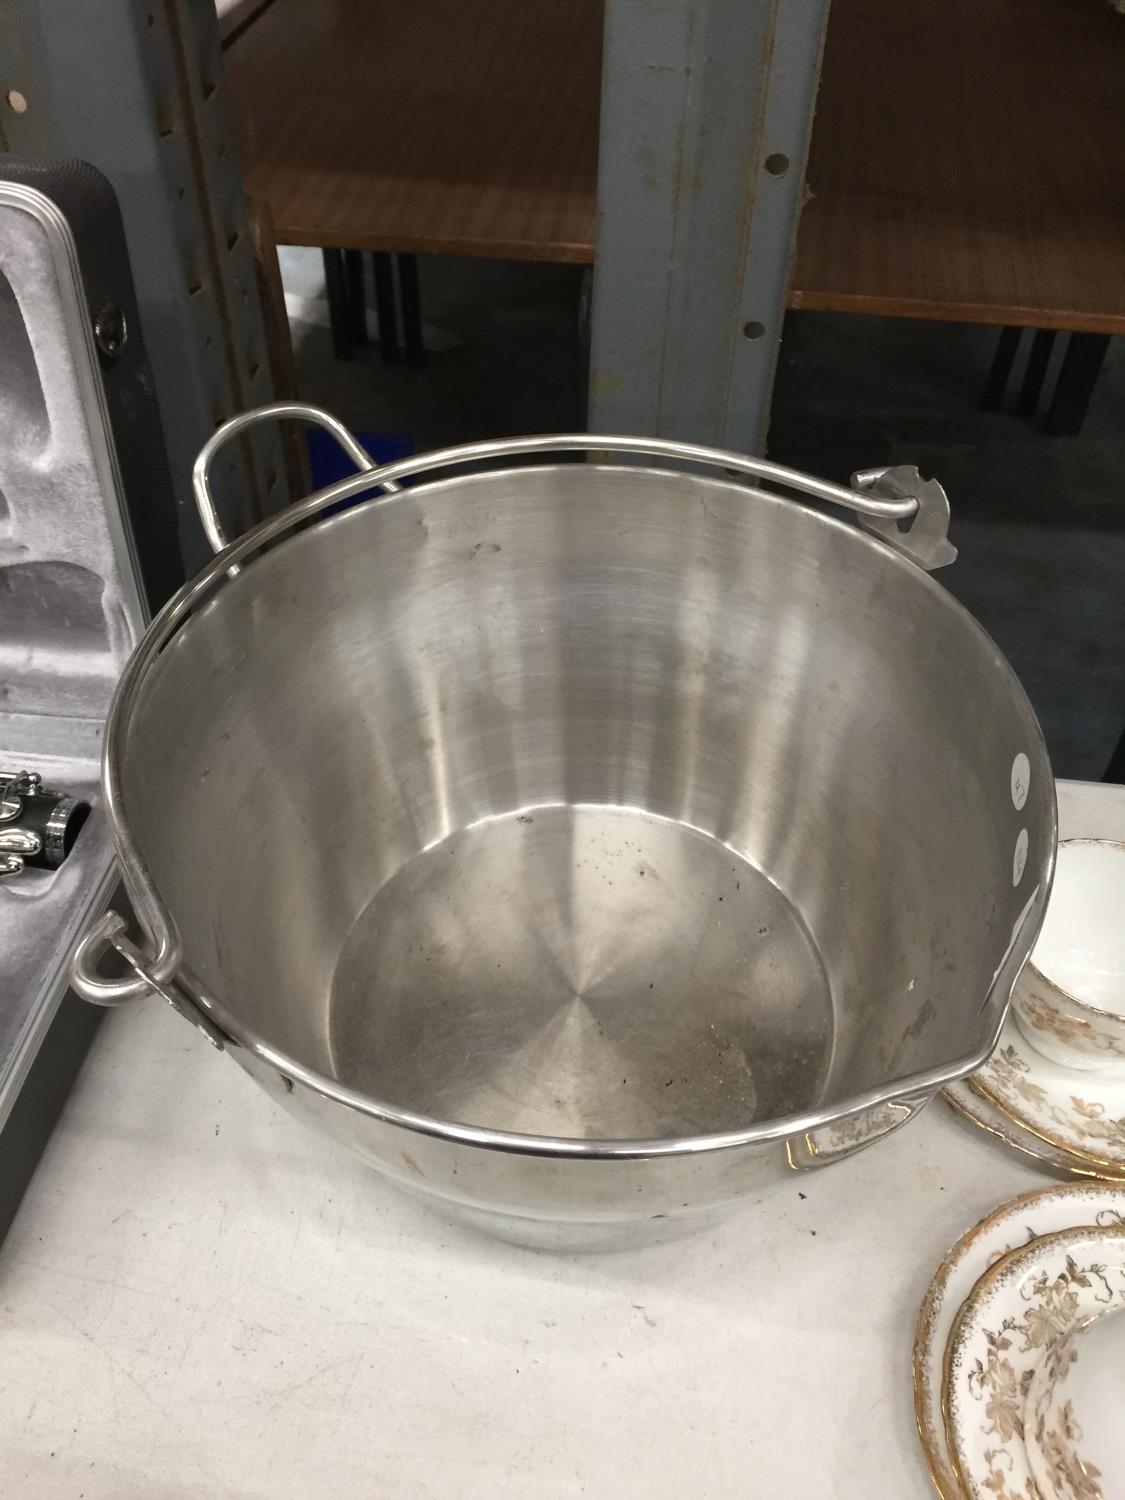 A LARGE STAINLESS STEEL COOKING POT - Image 2 of 3